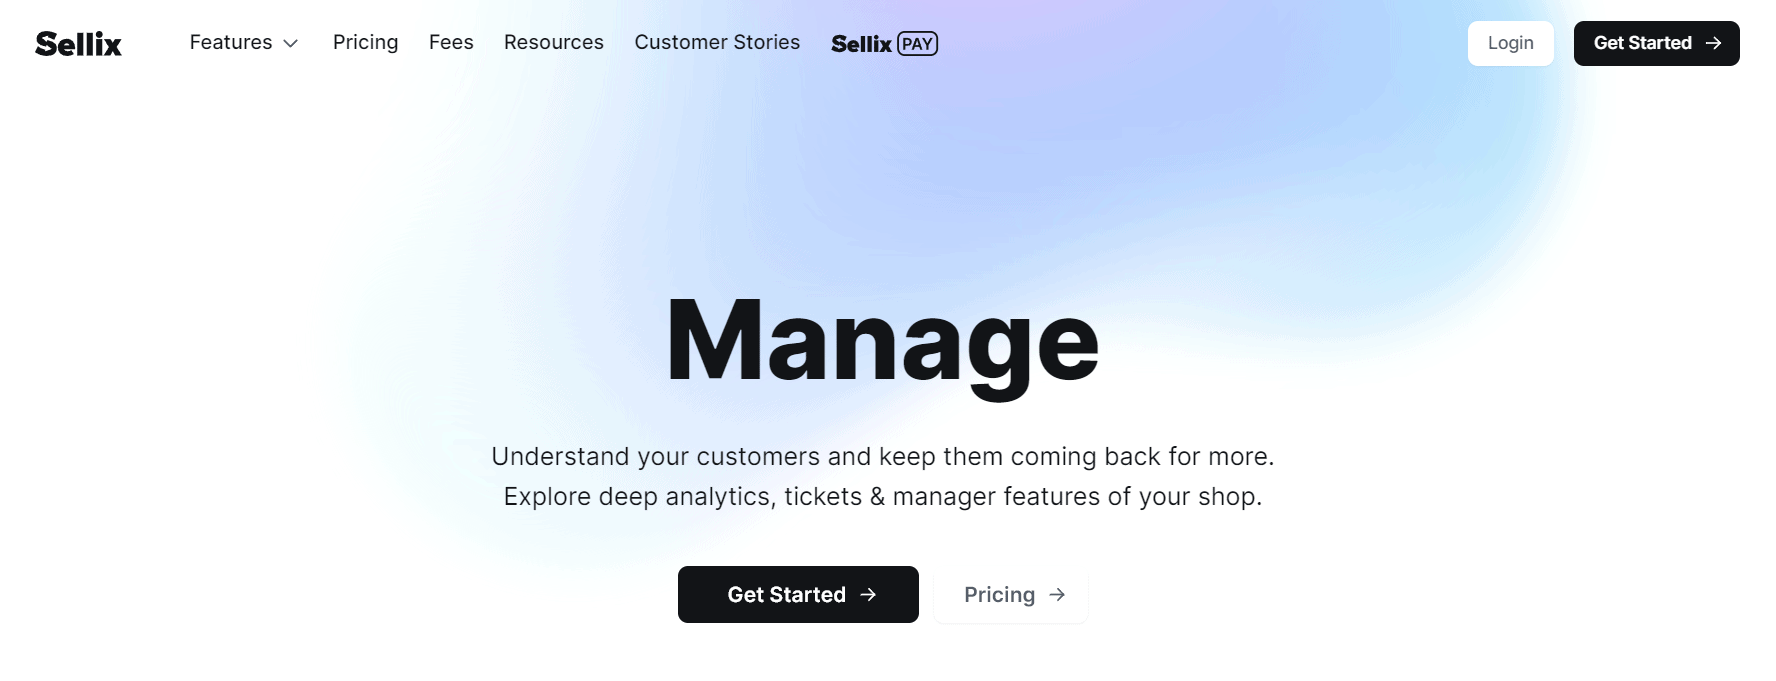 Sellix Manage Features